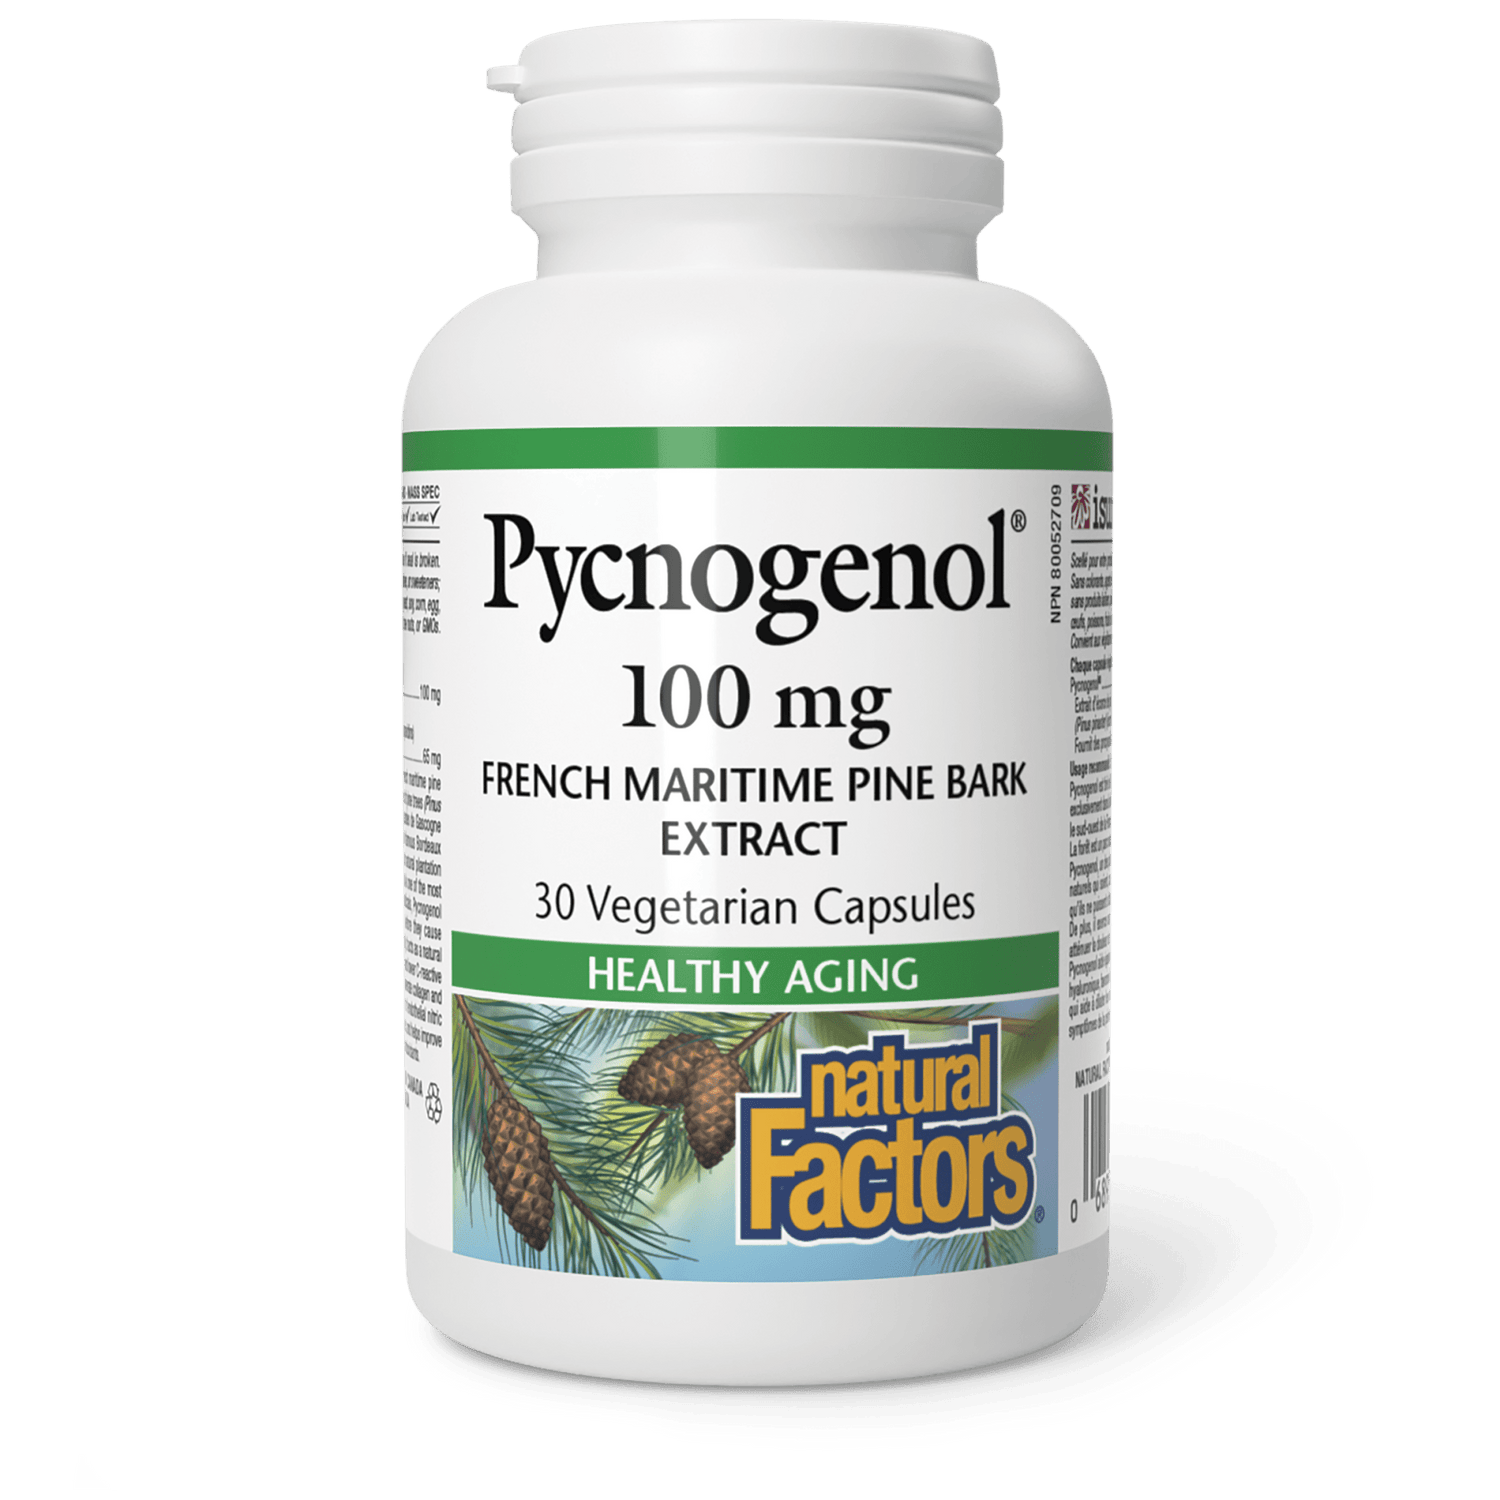 French Maritime Pine Bark Extract (Pycnogenol®) Effects on Human